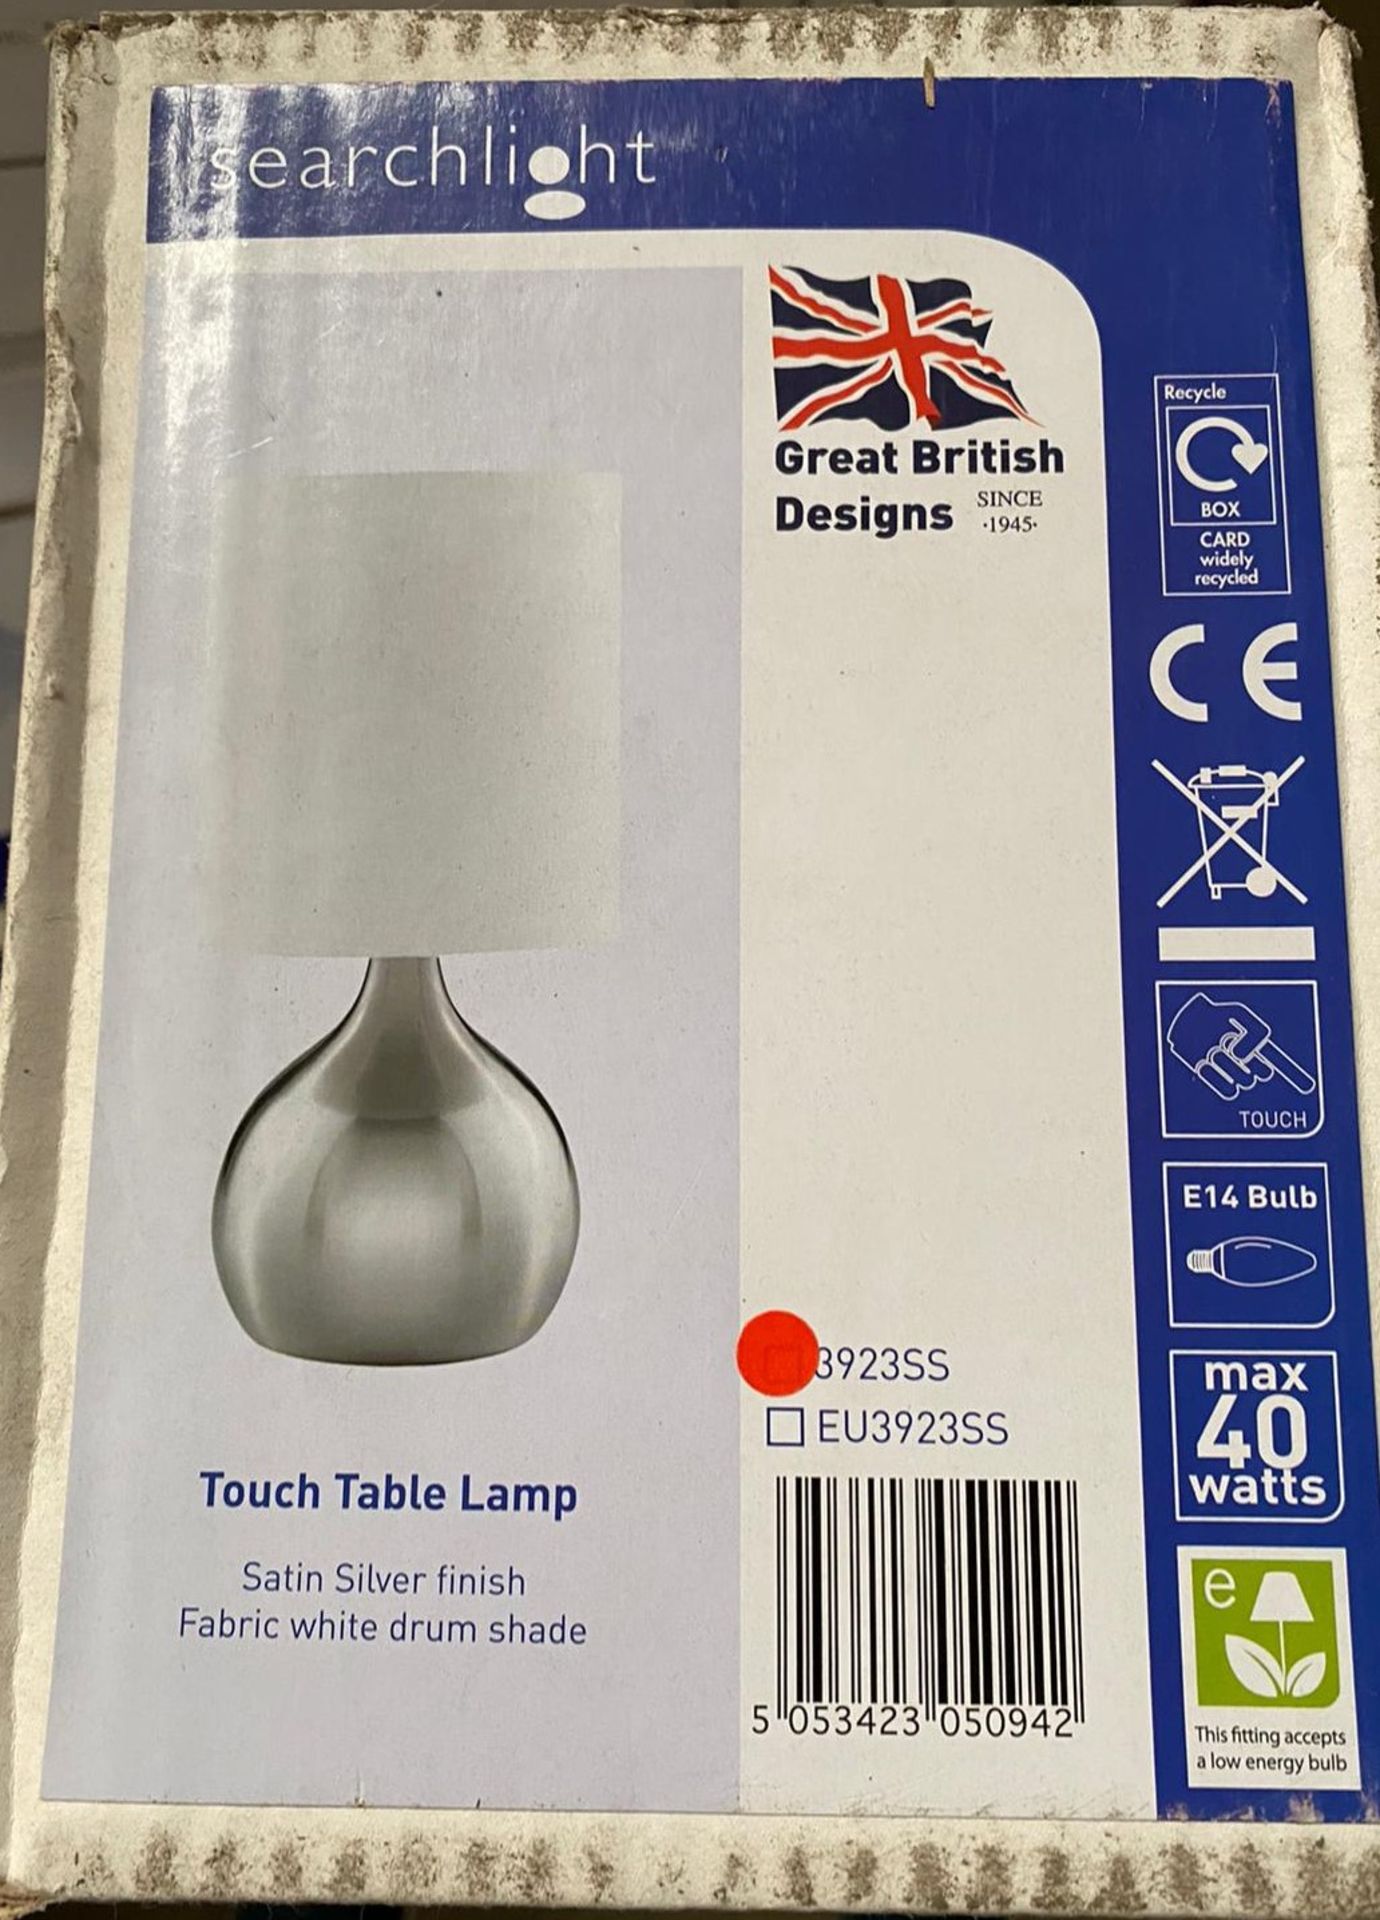 2 x Searchlight Touch Table Lamp in a satin silver finish - Ref: 3923SS - New and Boxed -